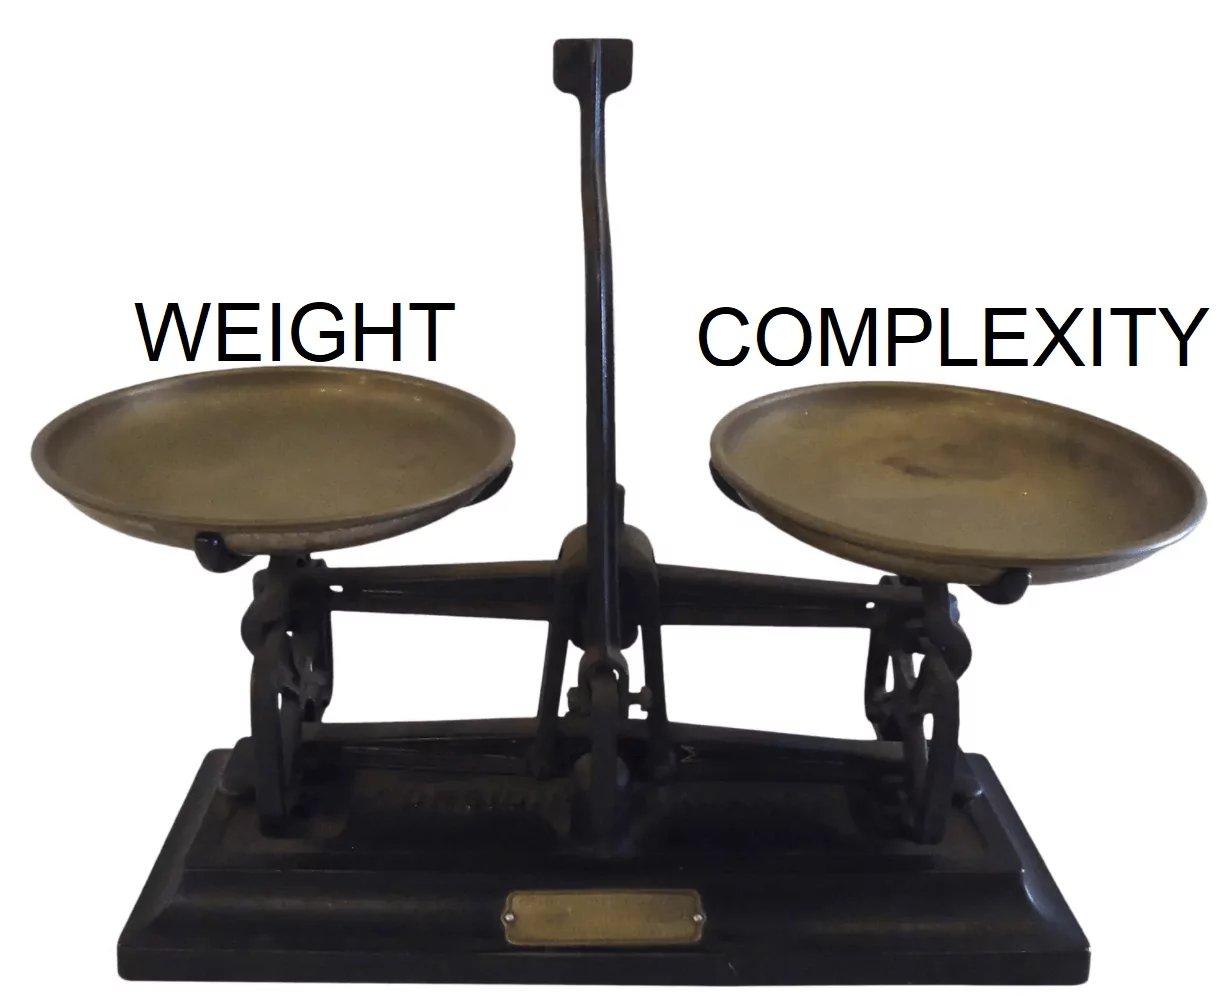 Board Games weight vs complexity